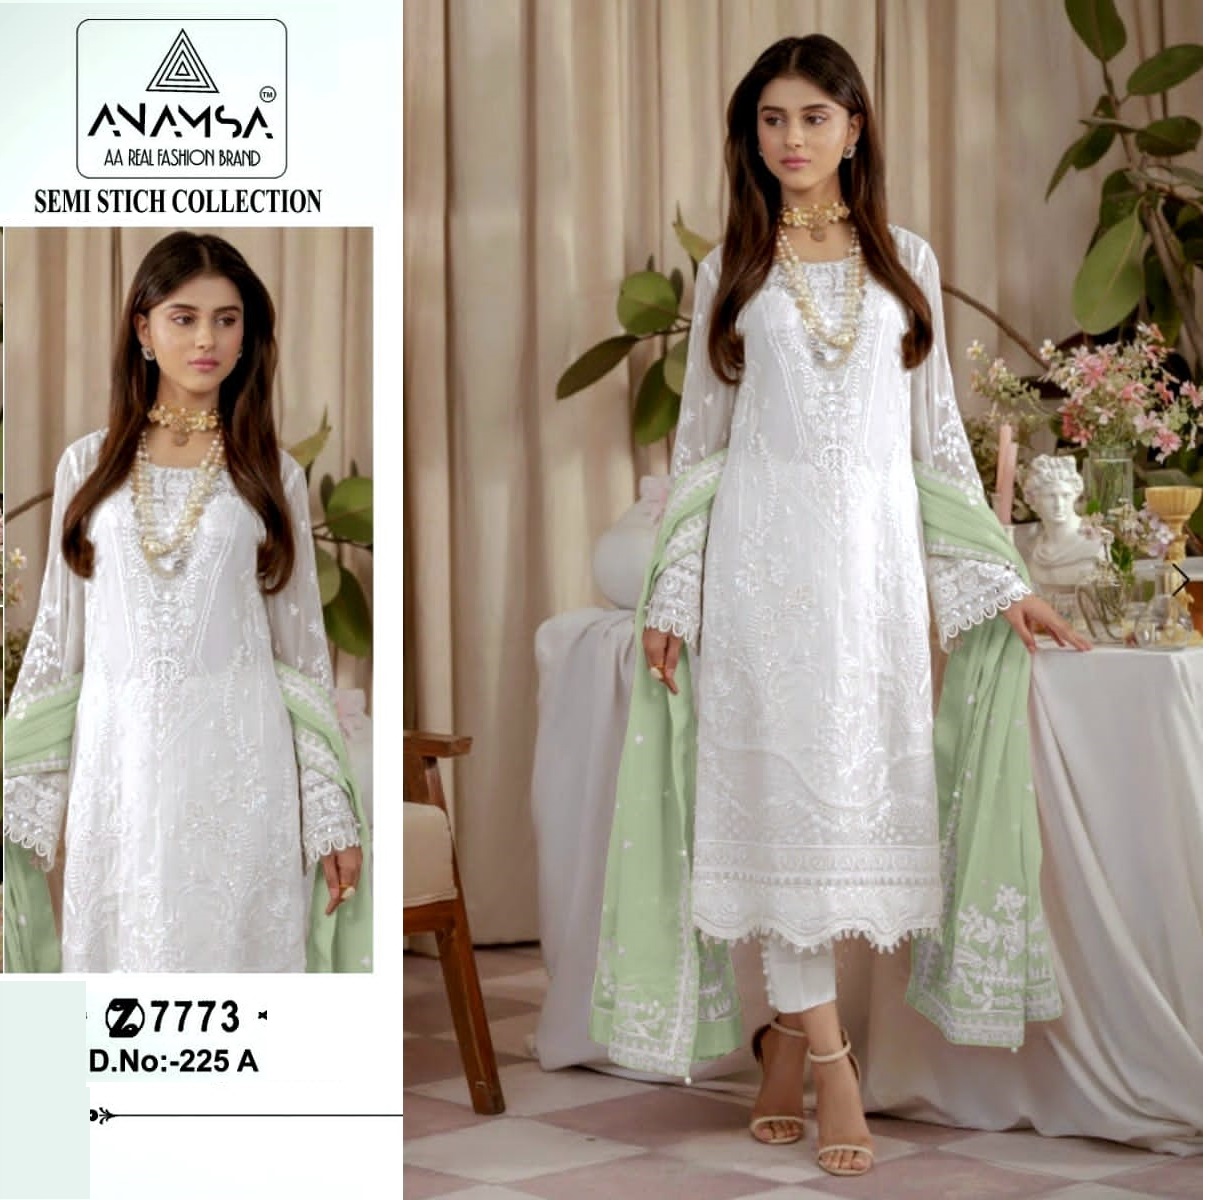 ANAMSA 225 A PAKISTANI SUITS IN INDIA